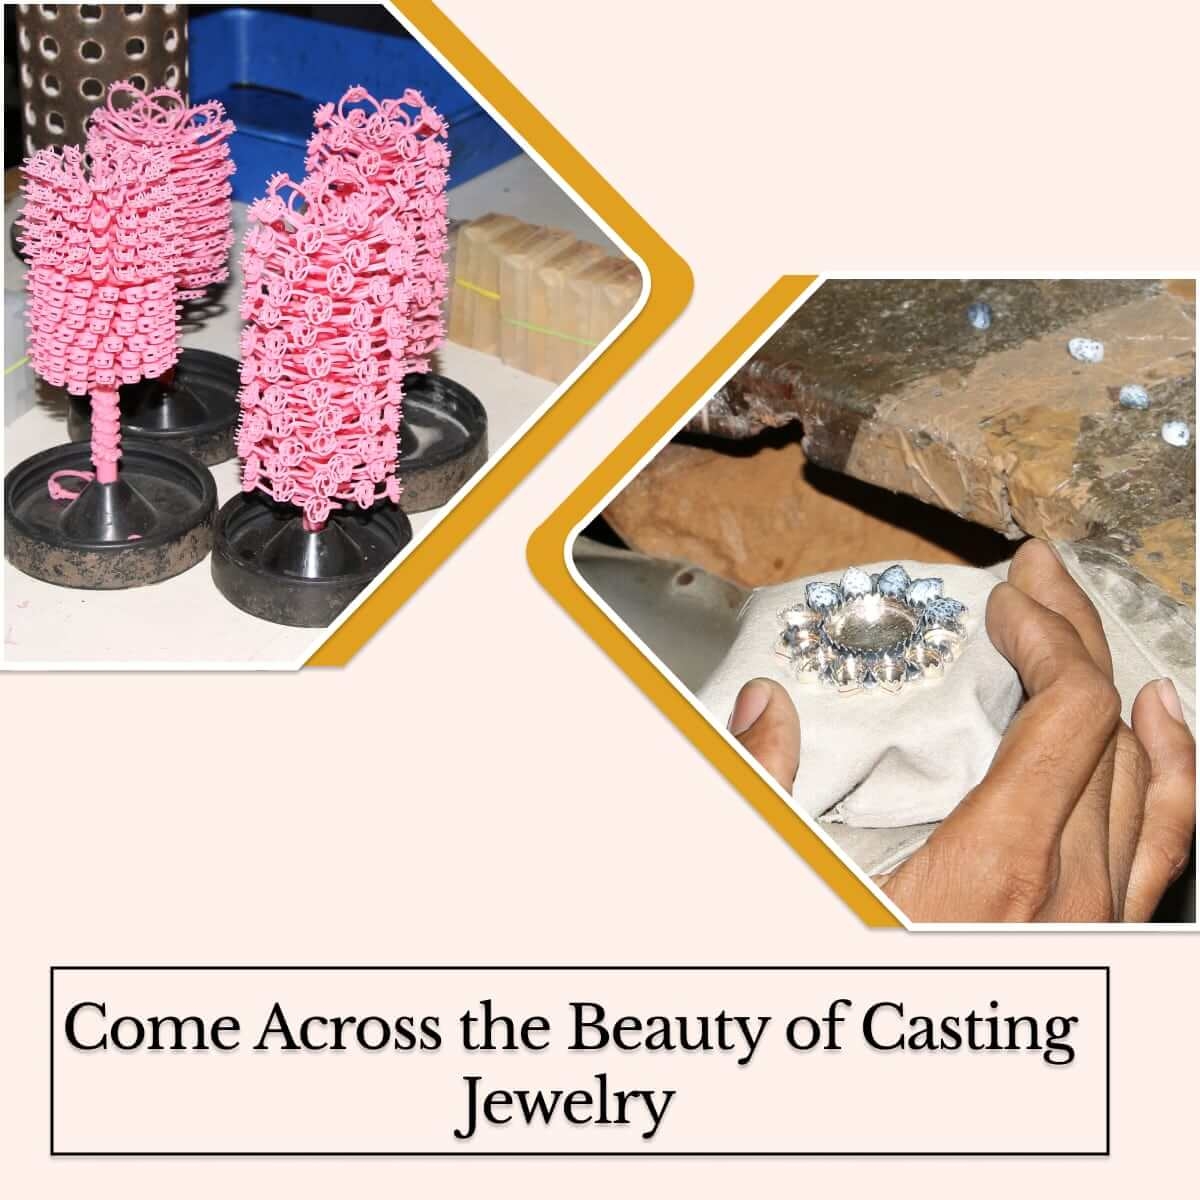 Beauty of Casting Jewelry